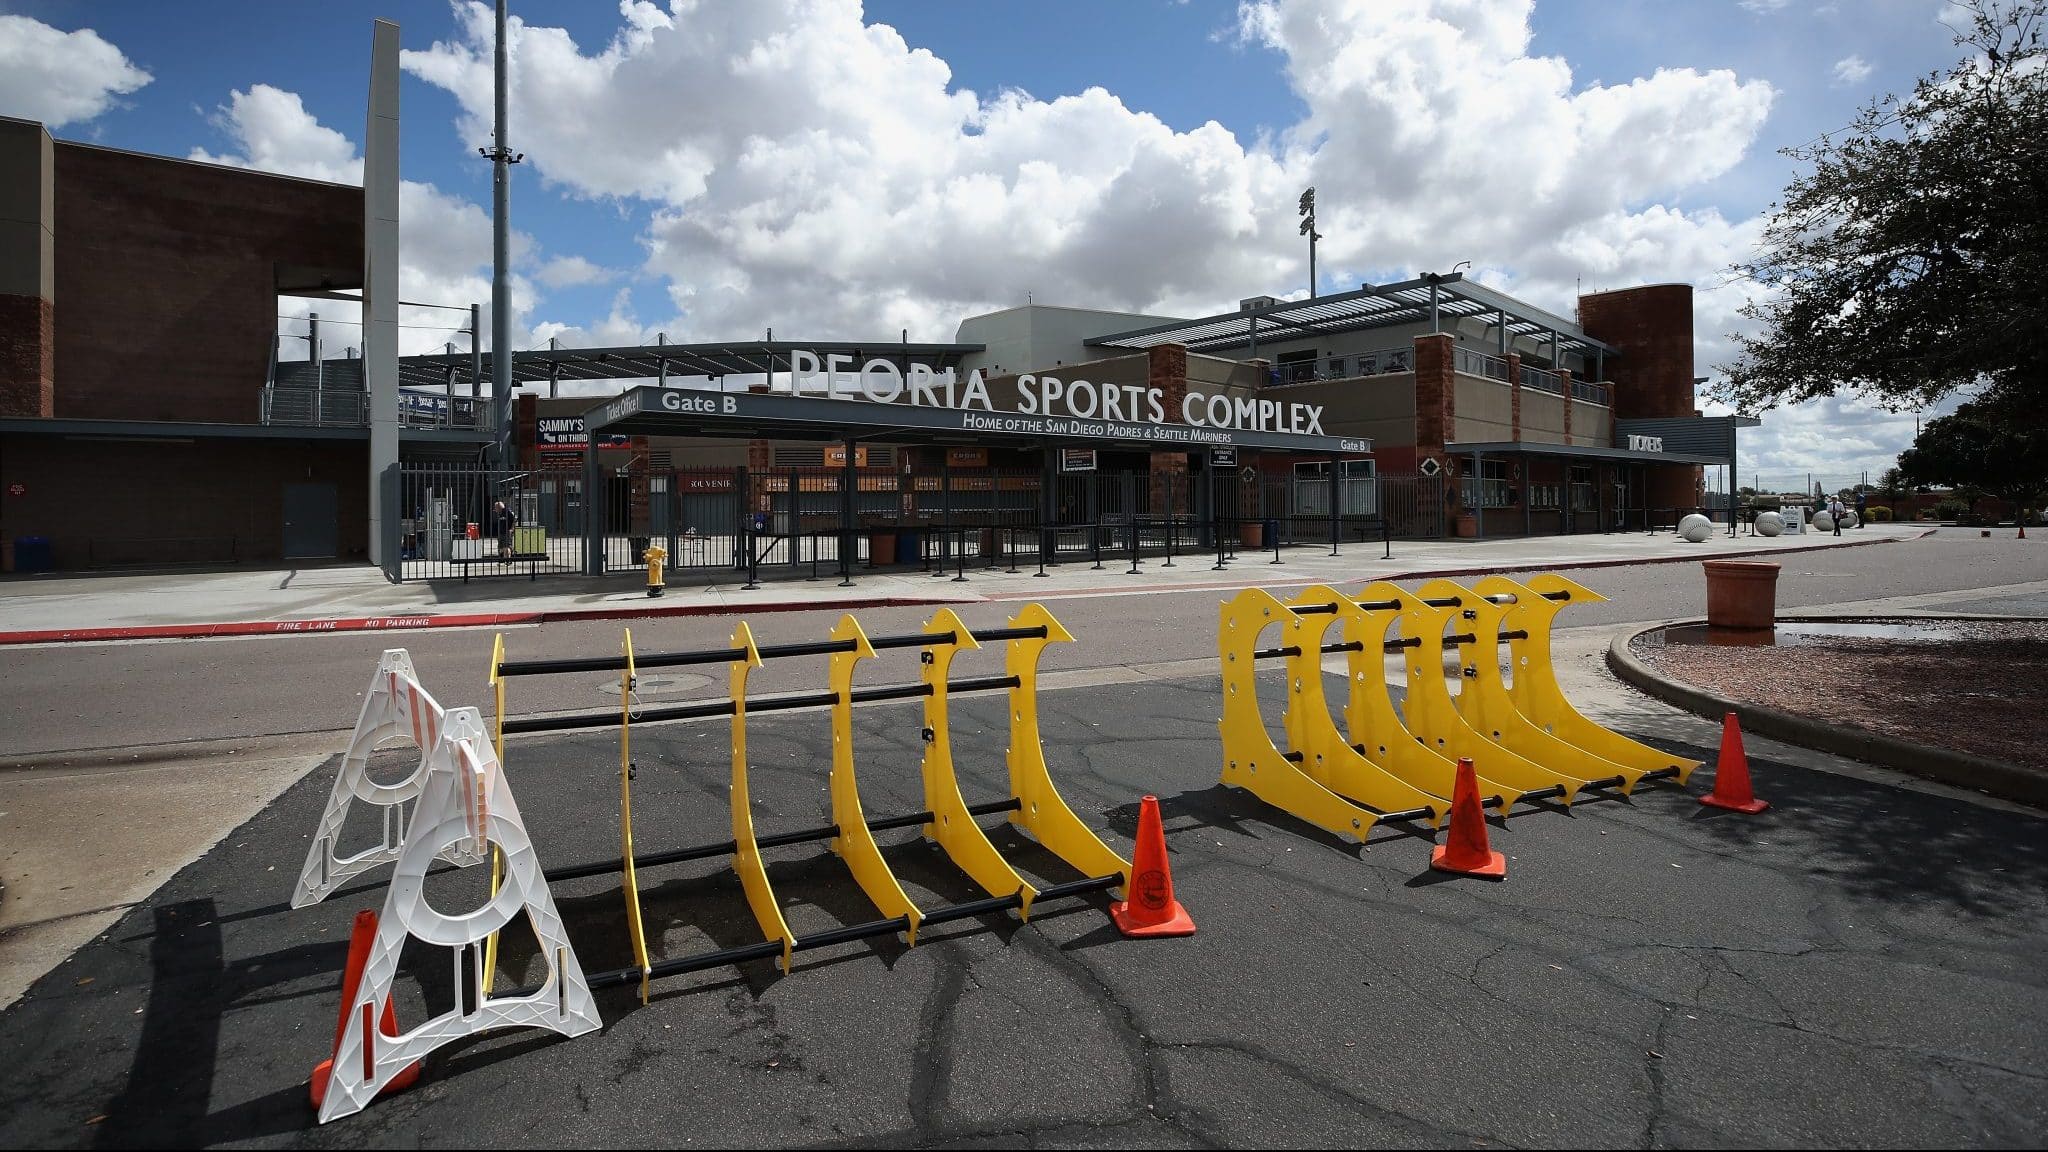 PEORIA, ARIZONA - MARCH 13: Parking barriers and cones are set up outside of Peoria Stadium on March 13, 2020 in Peoria, Arizona. Major League Baseball cancelled spring training games and has delayed opening day by at least two weeks due to COVID-19.